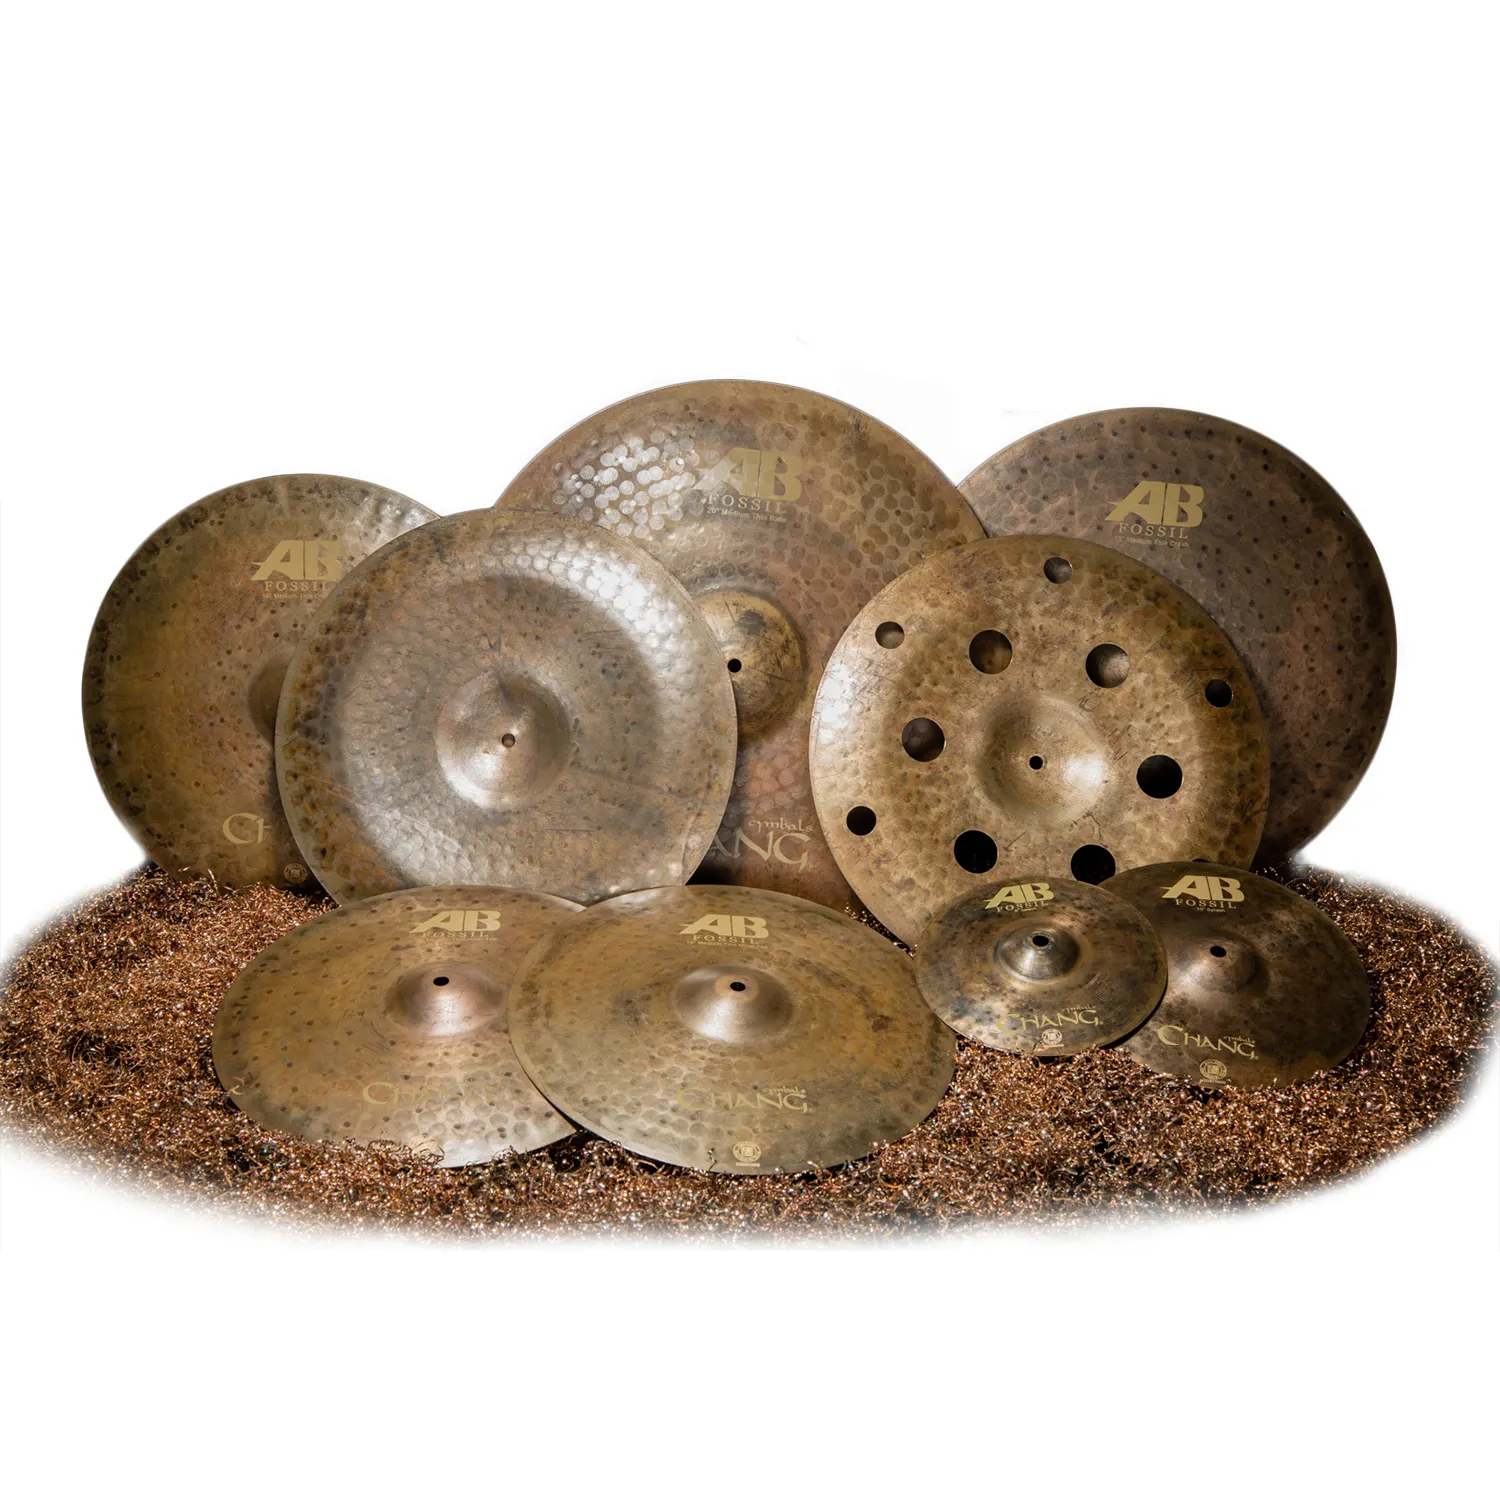 Chang Cymbals Ab Fossiele Bekkens Pack Drum Cymbals Simbal